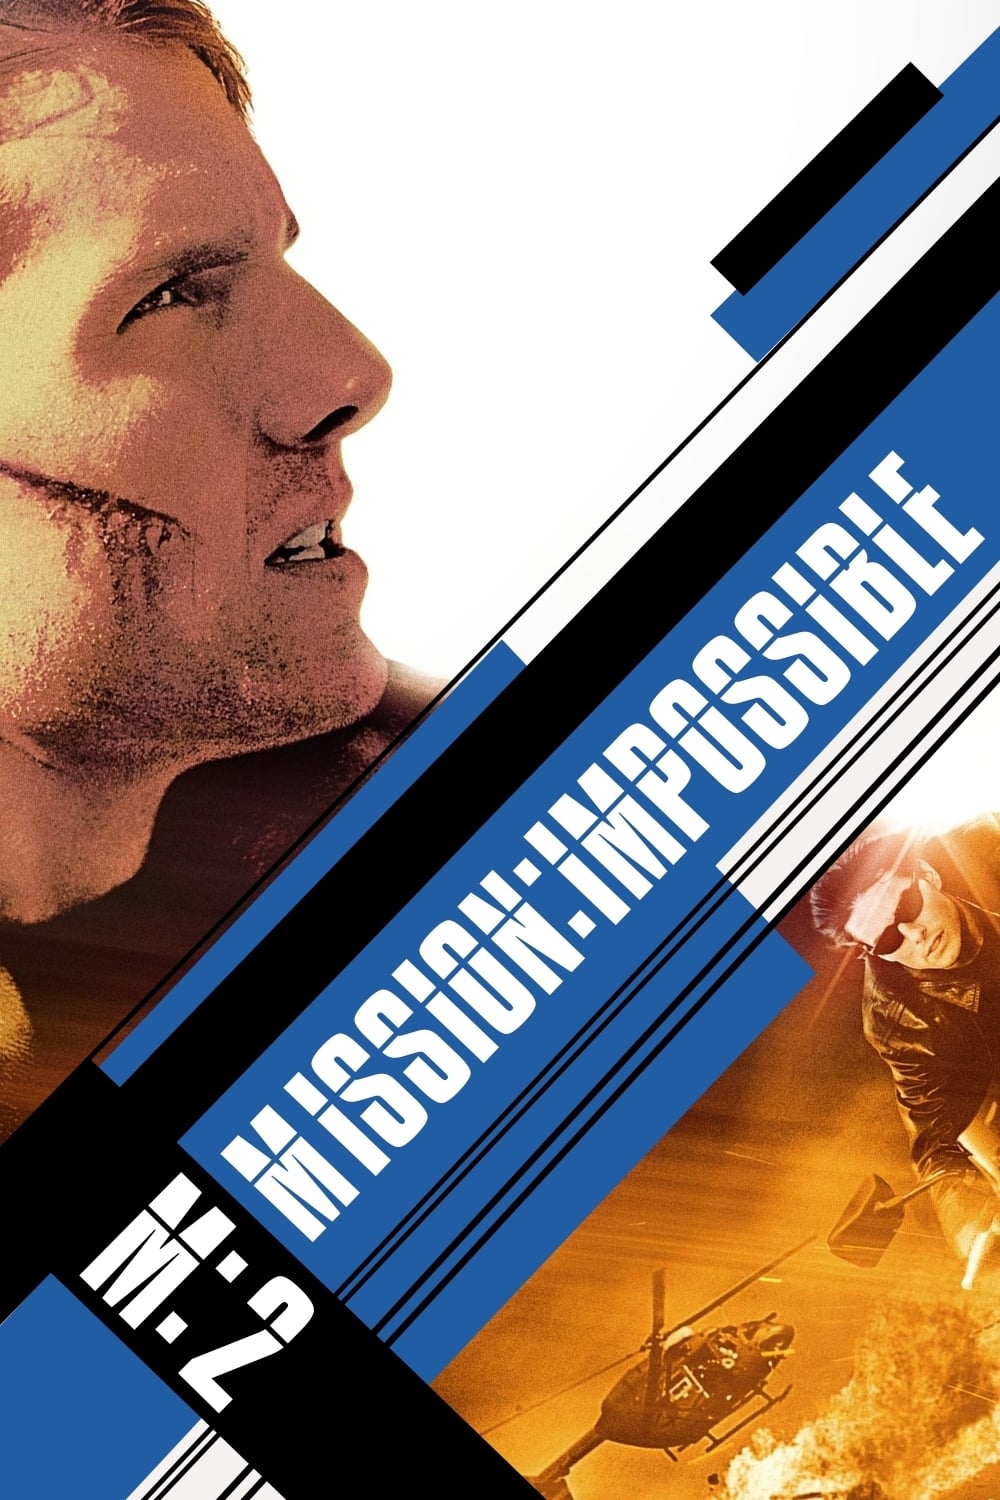 Mission Impossible II (2000) REMUX 4K HDR Latino – CMHDD